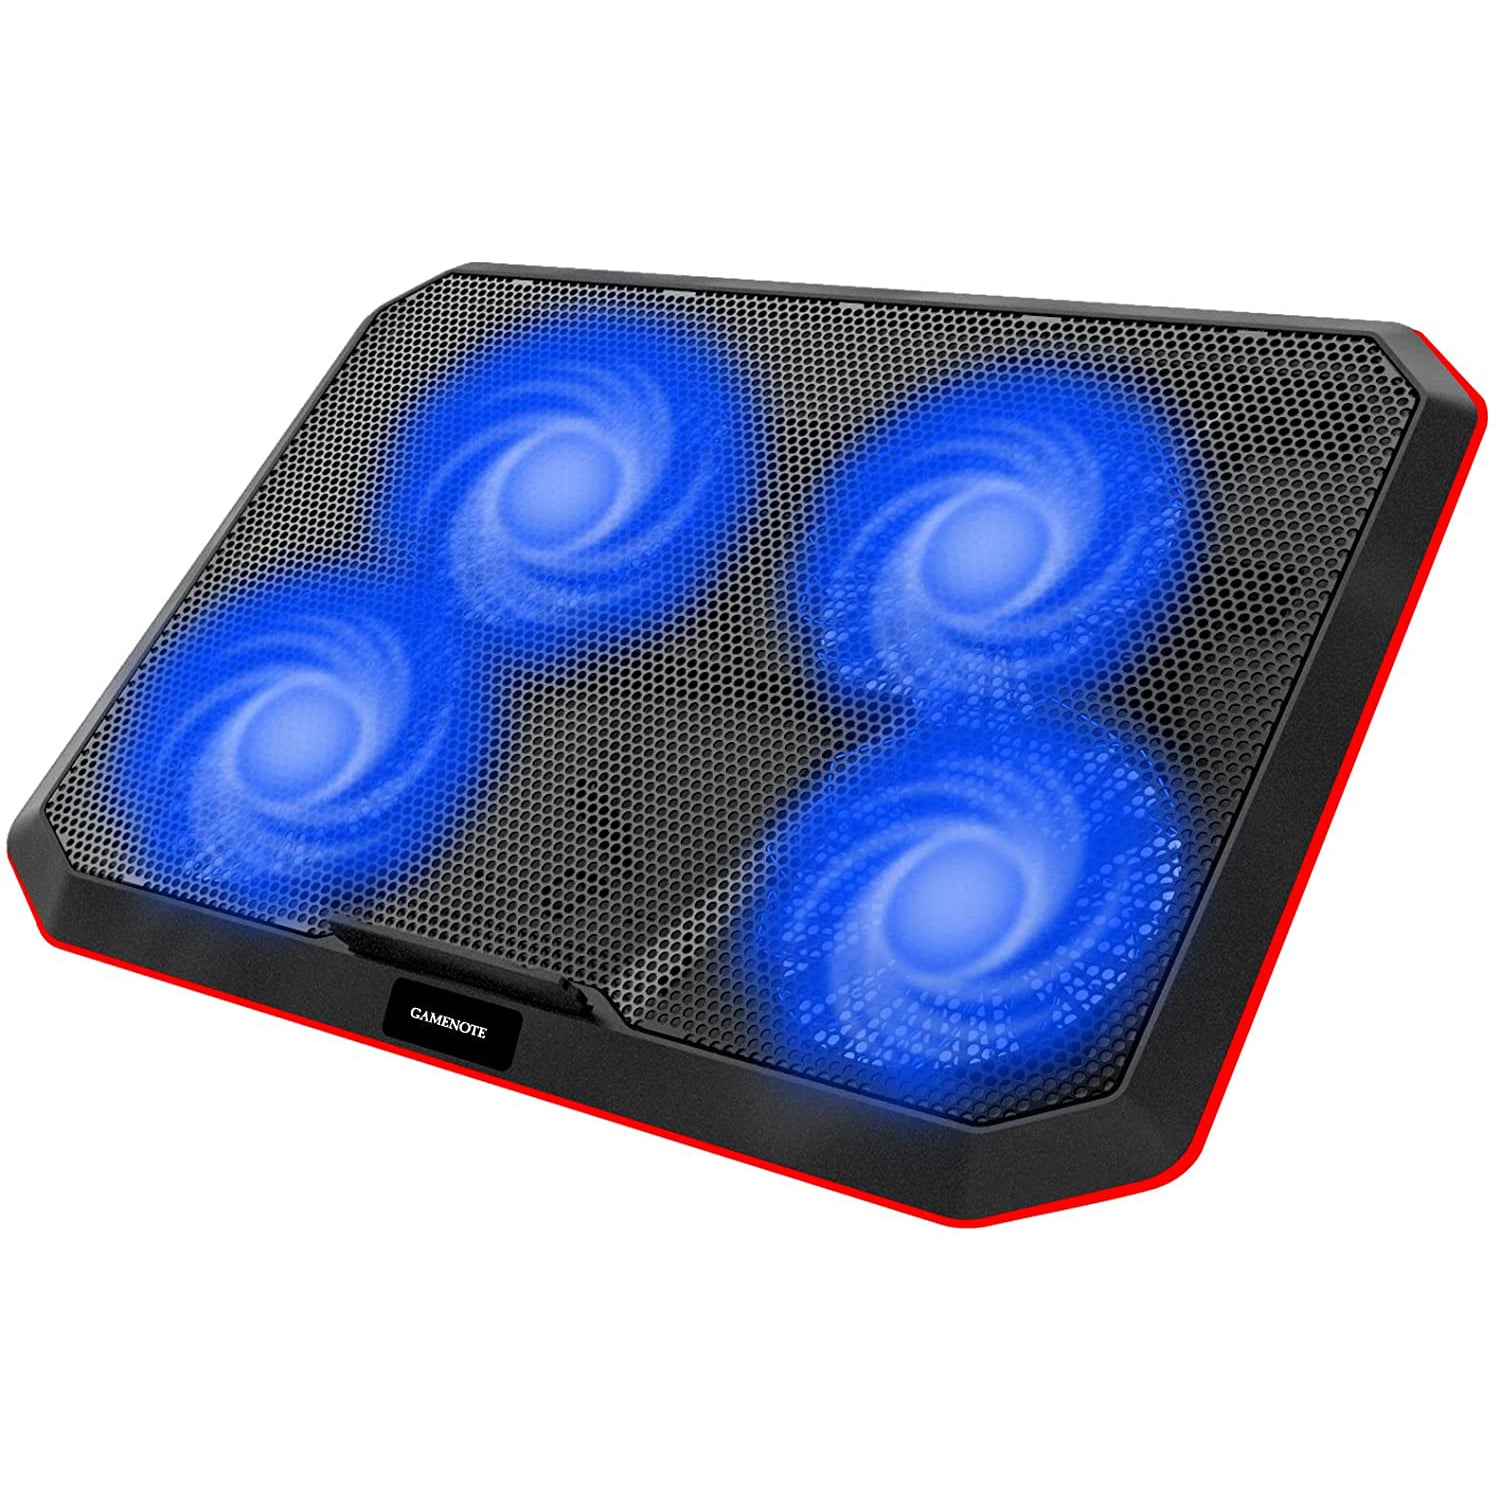 HAVIT HV-F2069 Laptop Cooling Pad for Up to 17 Inch Laptop with 4 Fans & LED Light